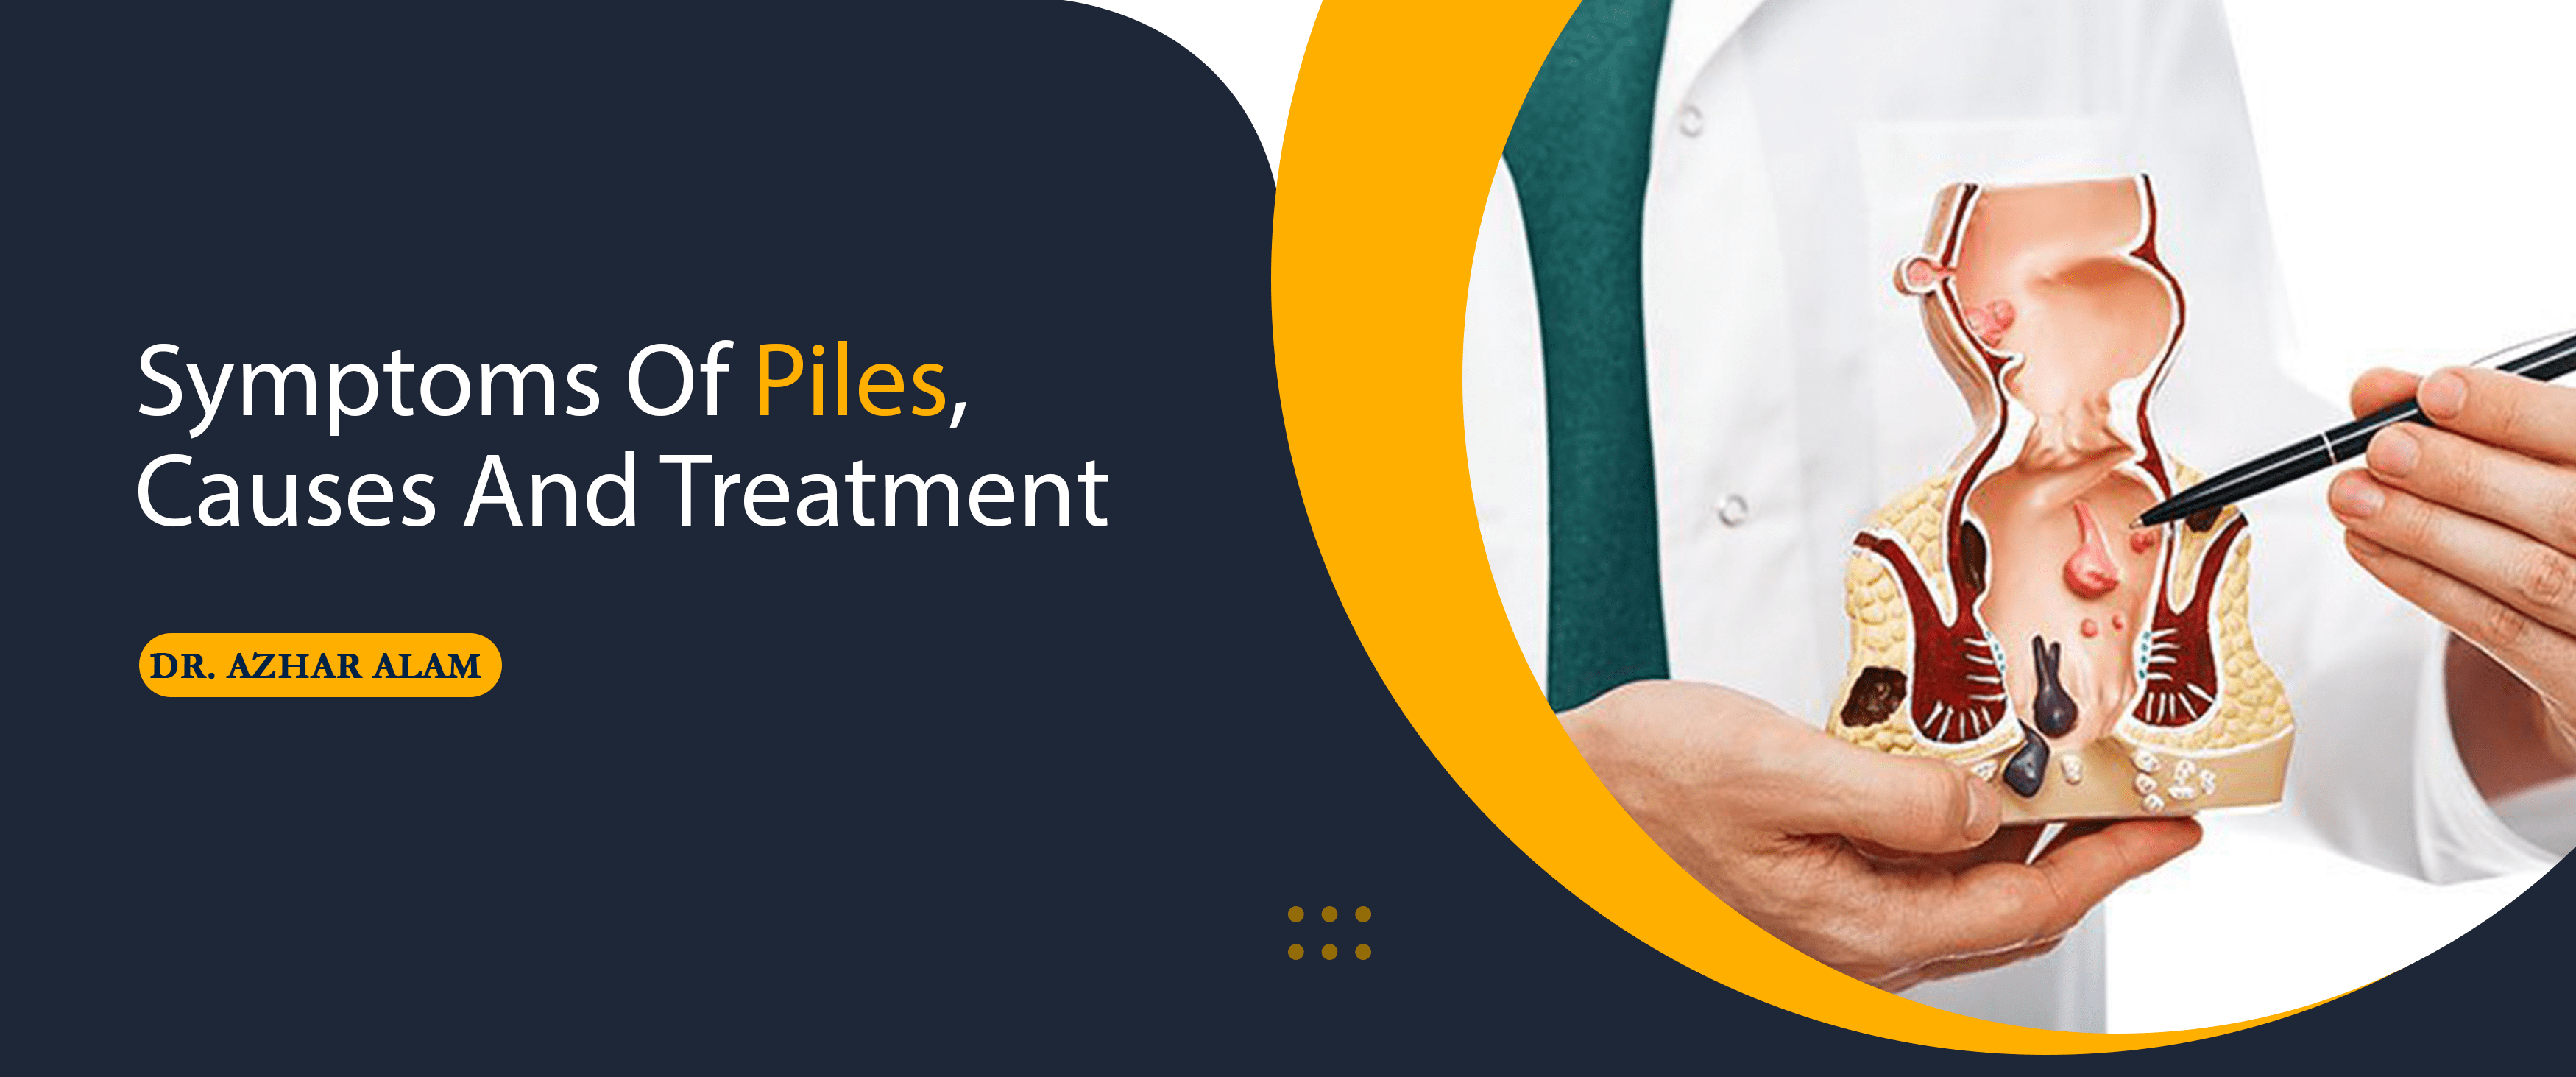 Piles - Symptoms, Meaning, Images, Causes and Types